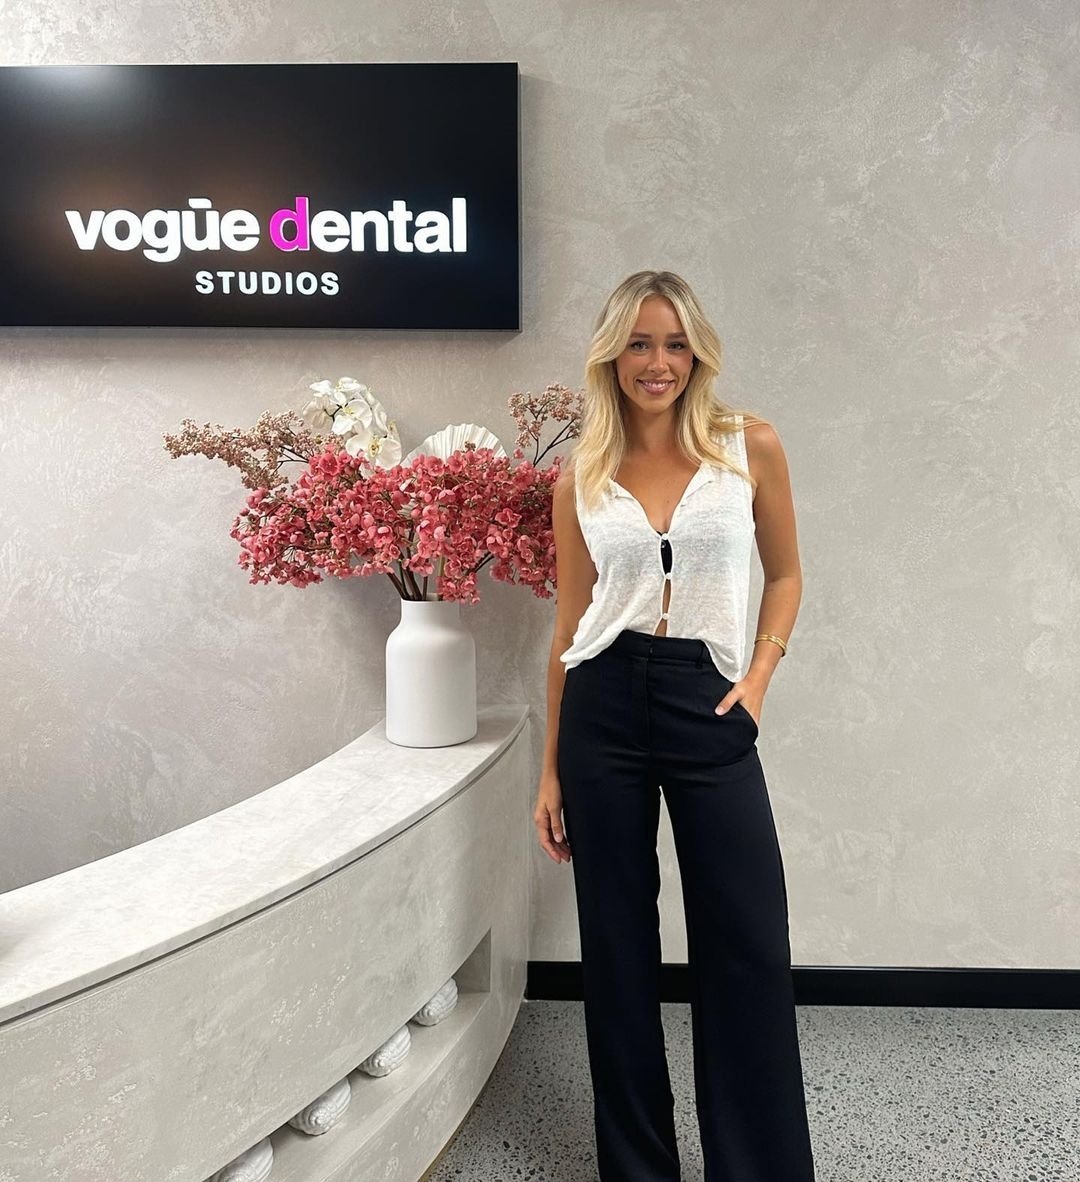 Leaving the dentist office with a SHINY, CONFIDENT SMILE 🦷🪥 @zoe.creed 

Miss Universe Australia is Proudly Presented by; @boldly.foods &amp; @ozwear_au_official
Education &amp; Business Grant Partner; @northsiderentals
Cosmetic Dentistry Partner; 